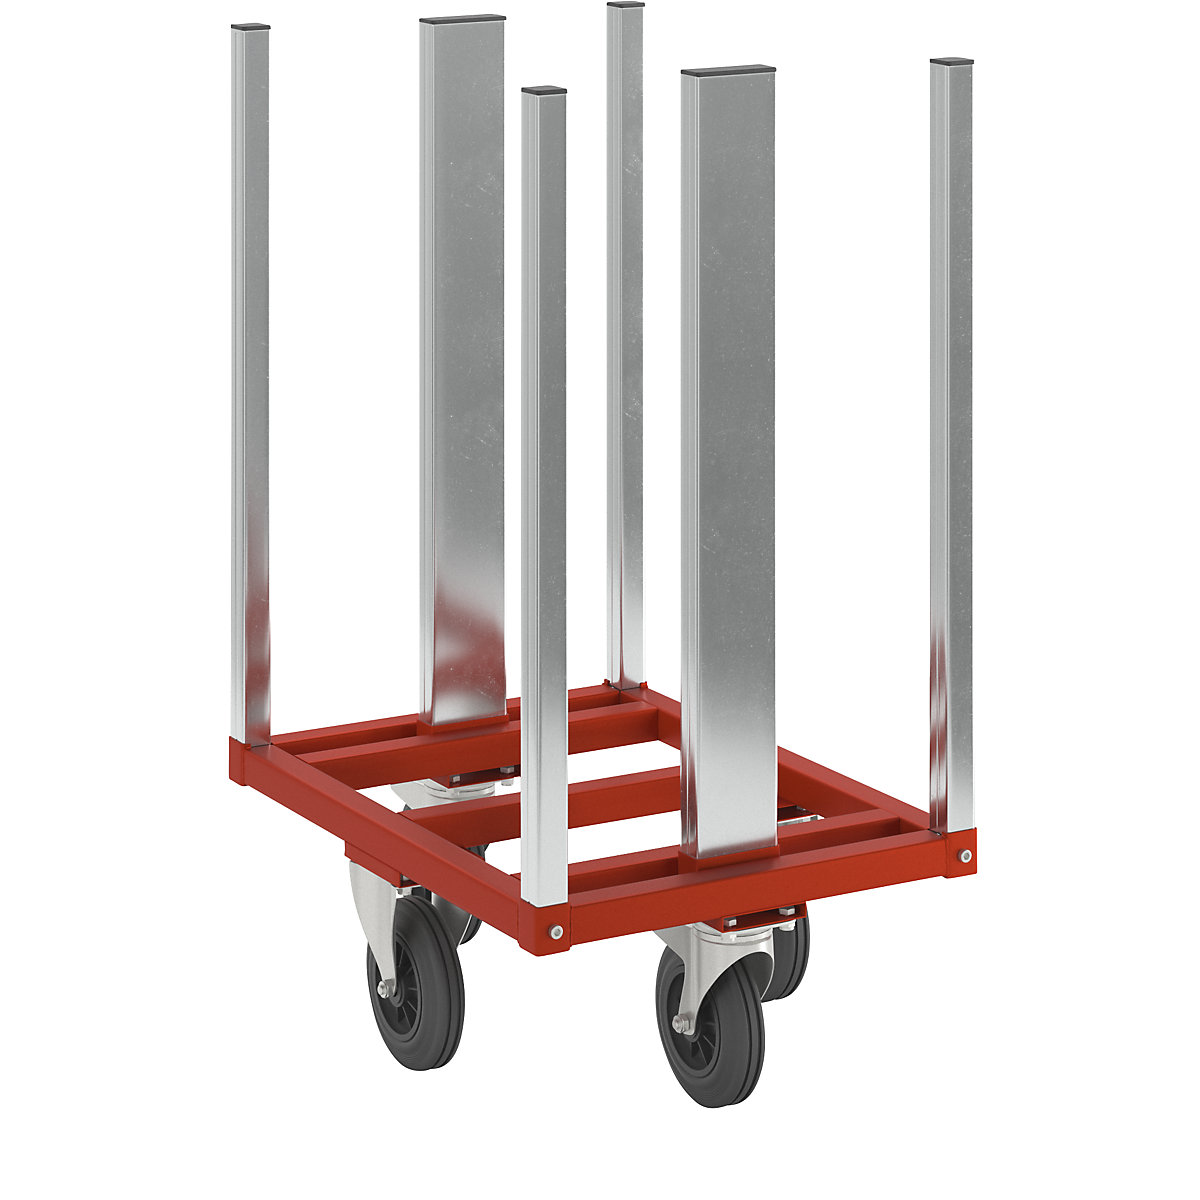 Dolly for KM224 pallet frame – Kongamek, LxWxH 800 x 600 x 1215 mm, 2 swivel castors with stops, 2 fixed castors-3